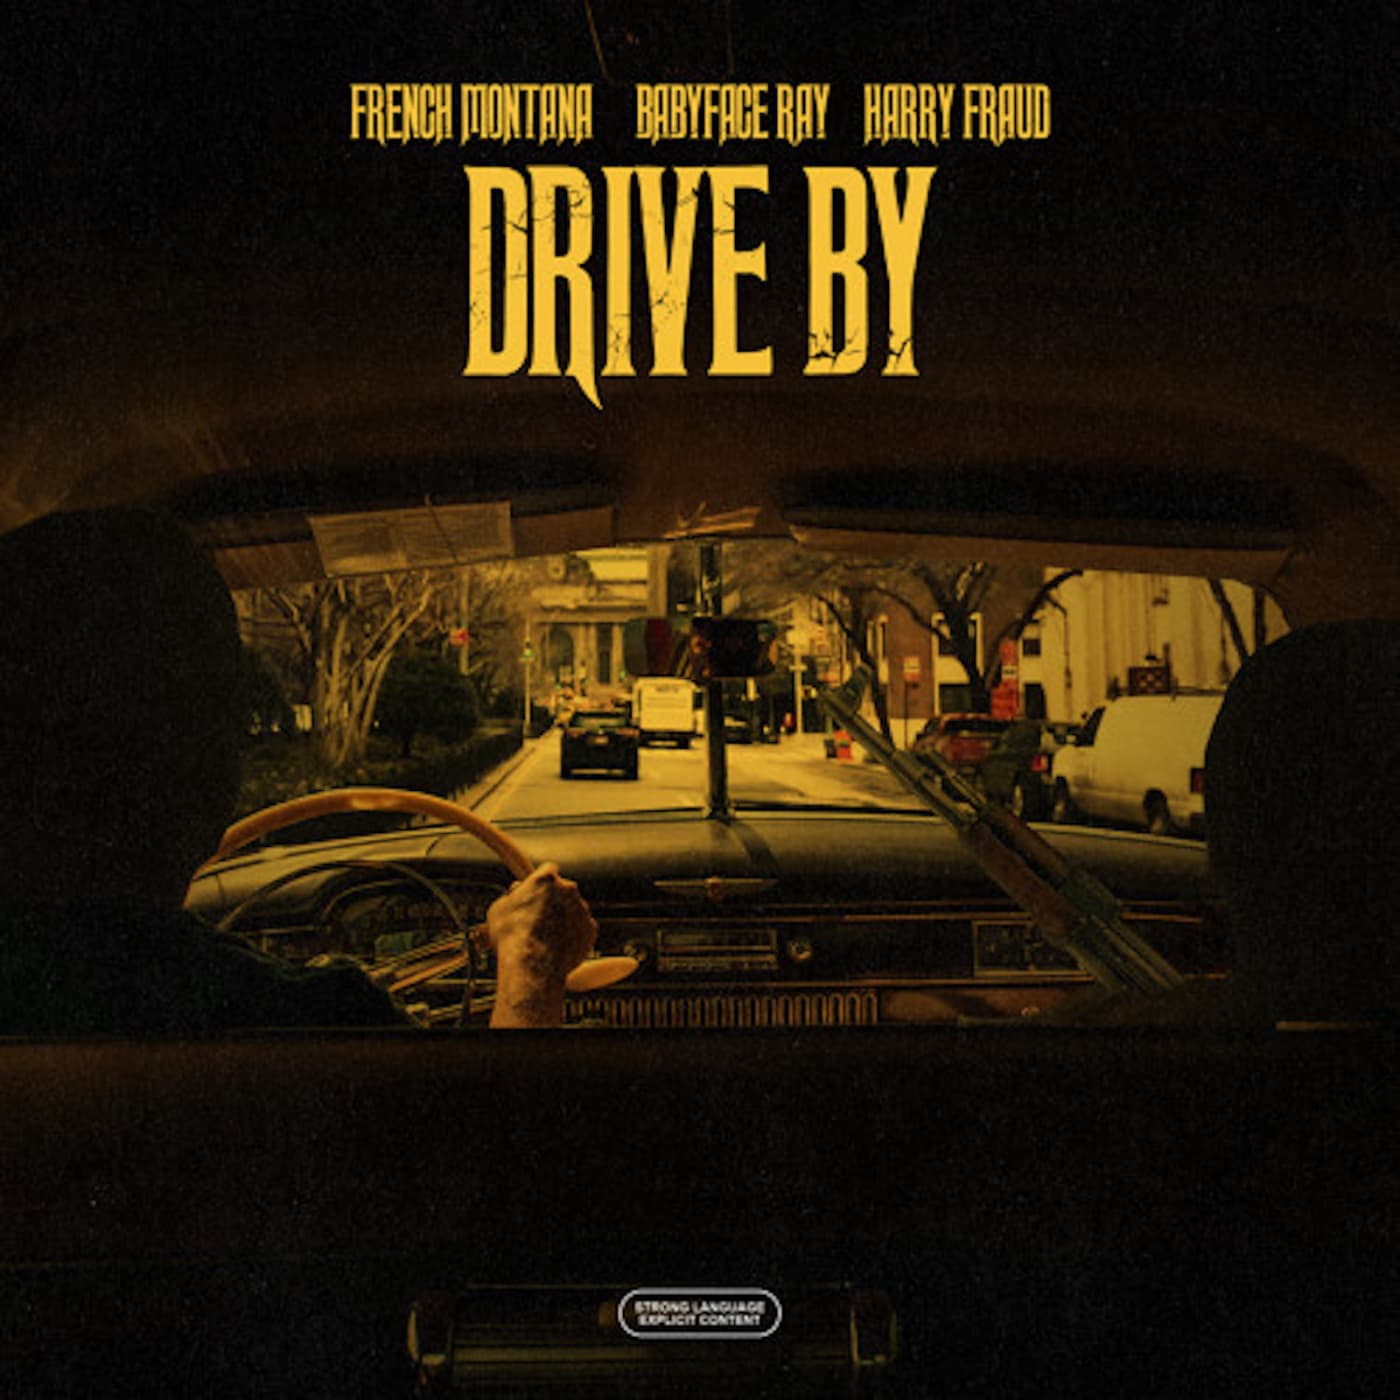 French Montana f/ Babyface Ray "Drive By"